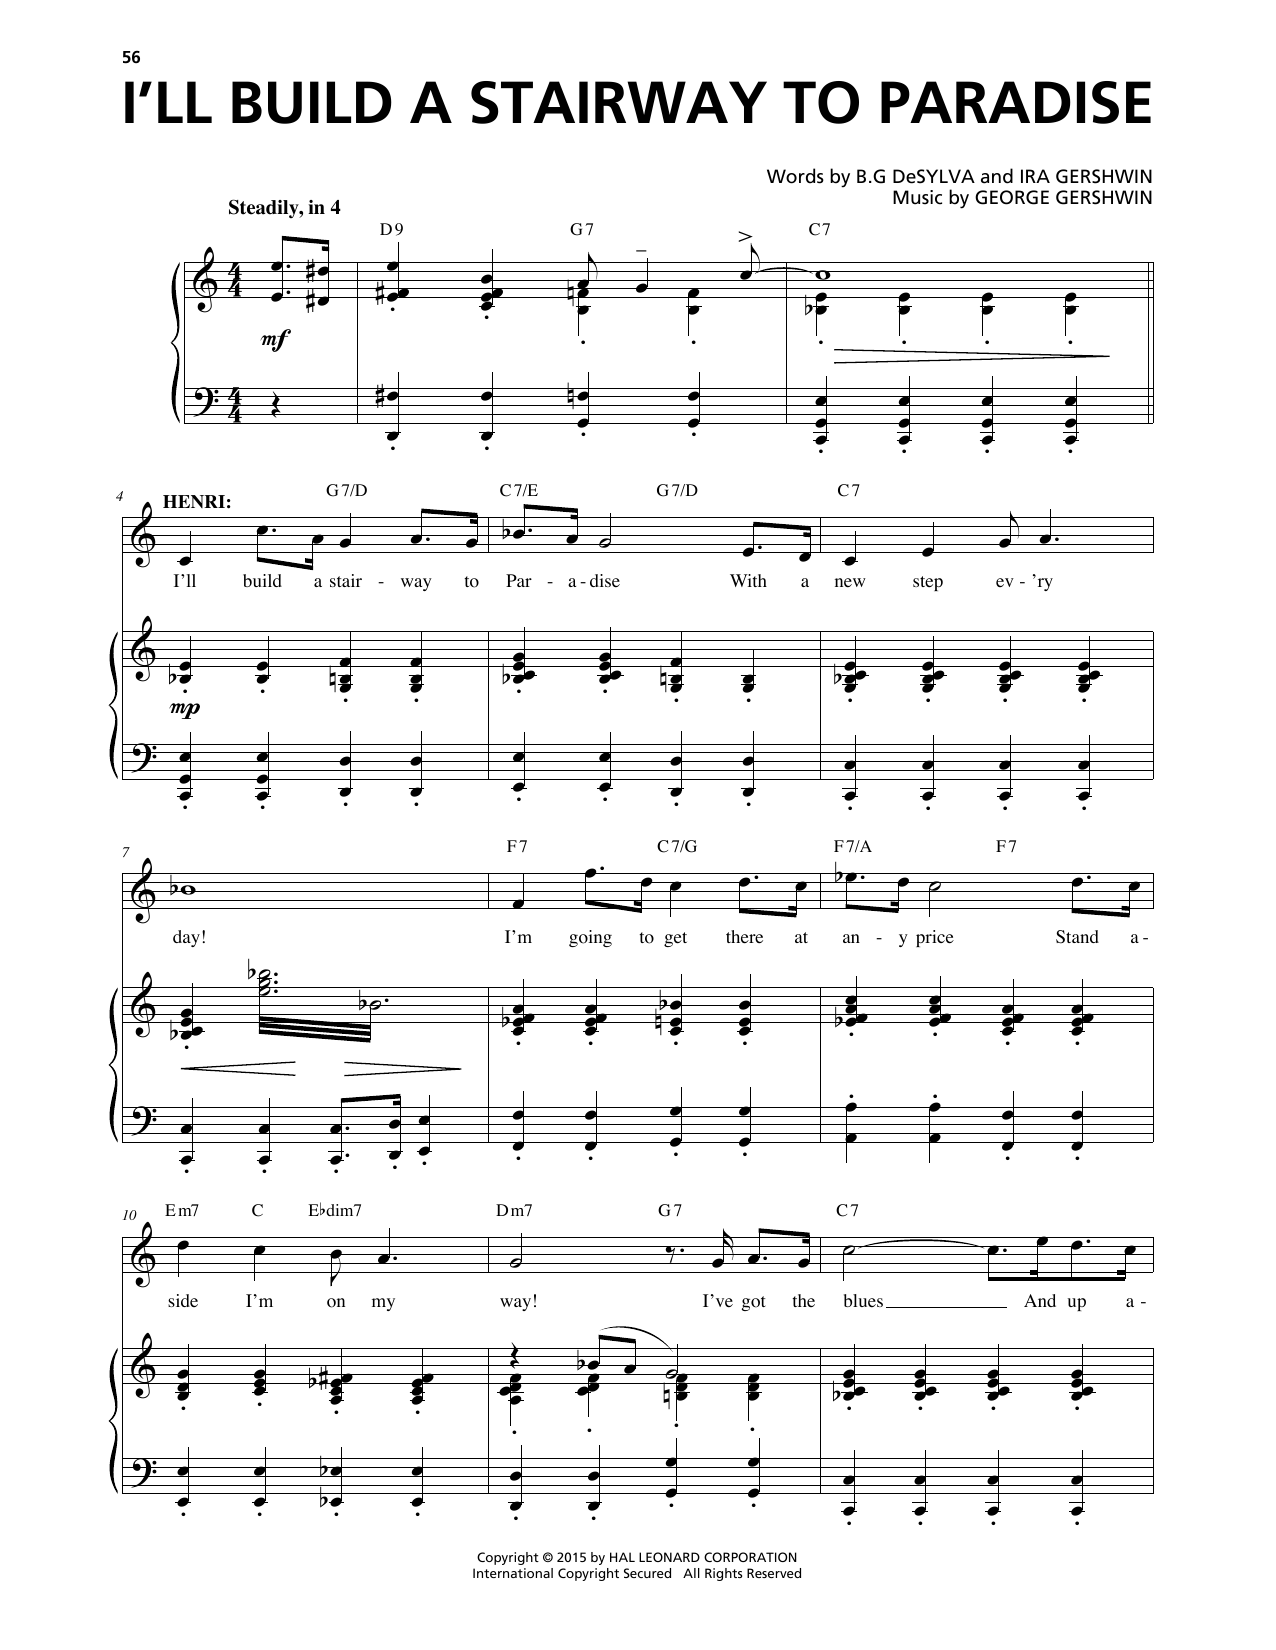 Download George Gershwin & Ira Gershwin I'll Build A Stairway To Paradise (from Sheet Music